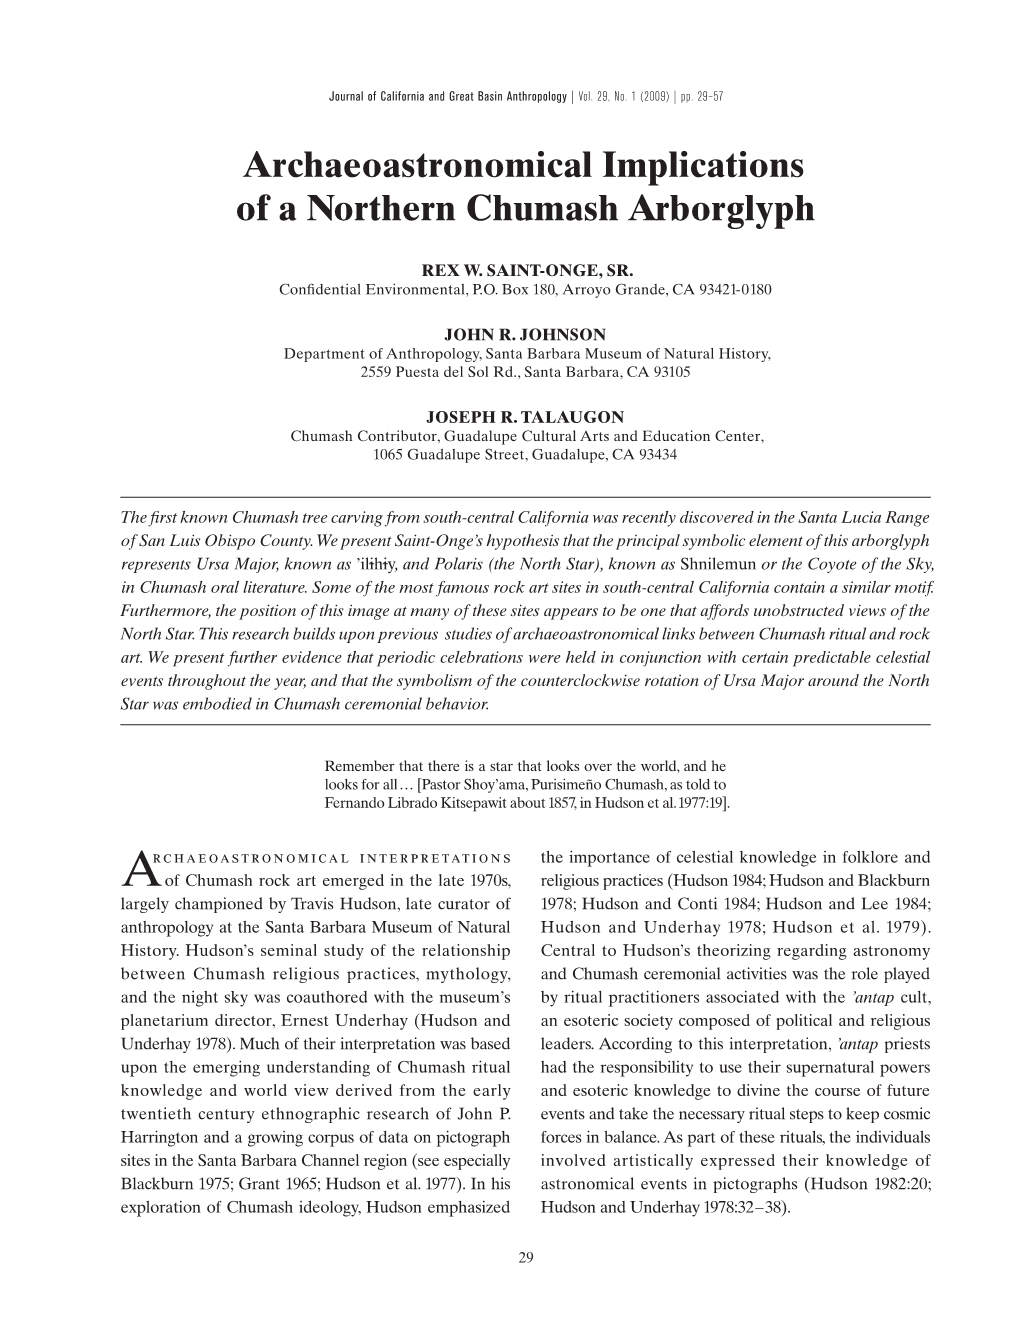 Archaeoastronomical Implications of a Northern Chumash Arborglyph